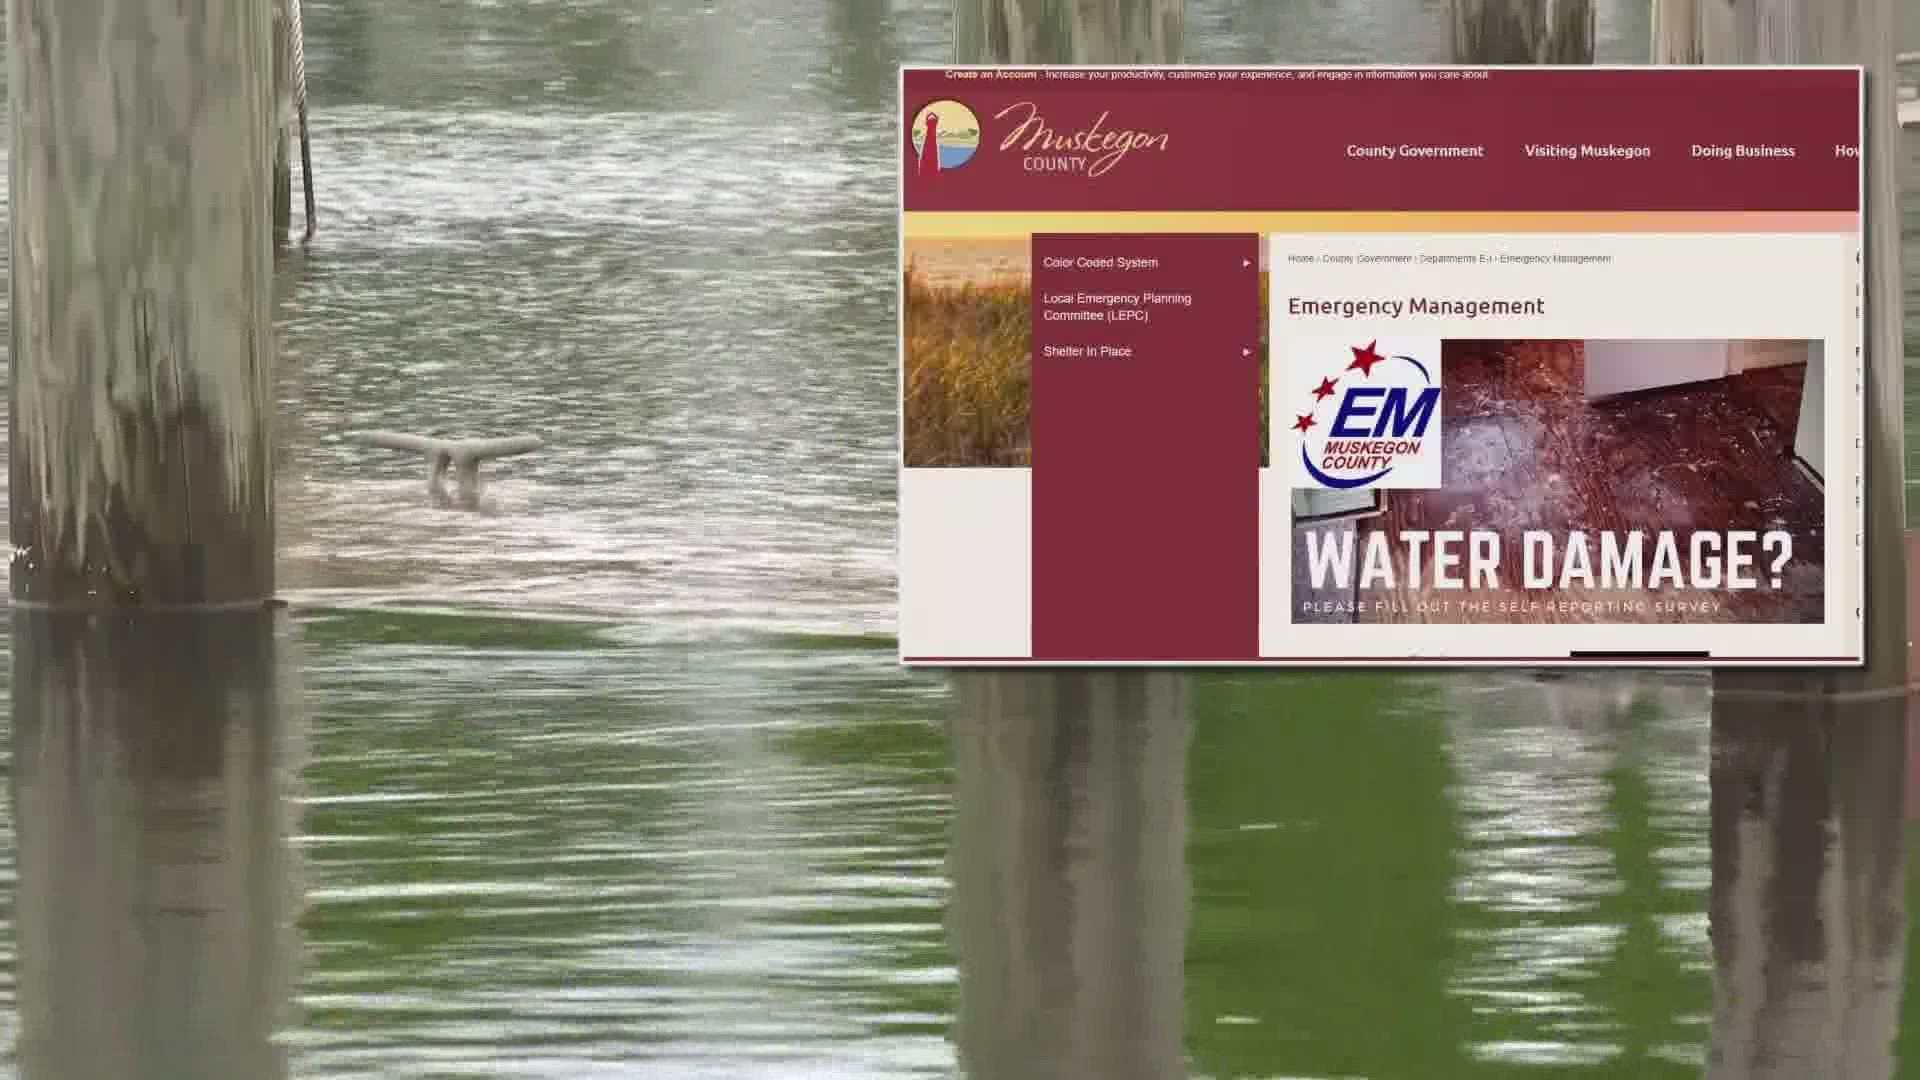 Muskegon County declares State of Emergency following flooding. Muskegon Officials are look for funding.